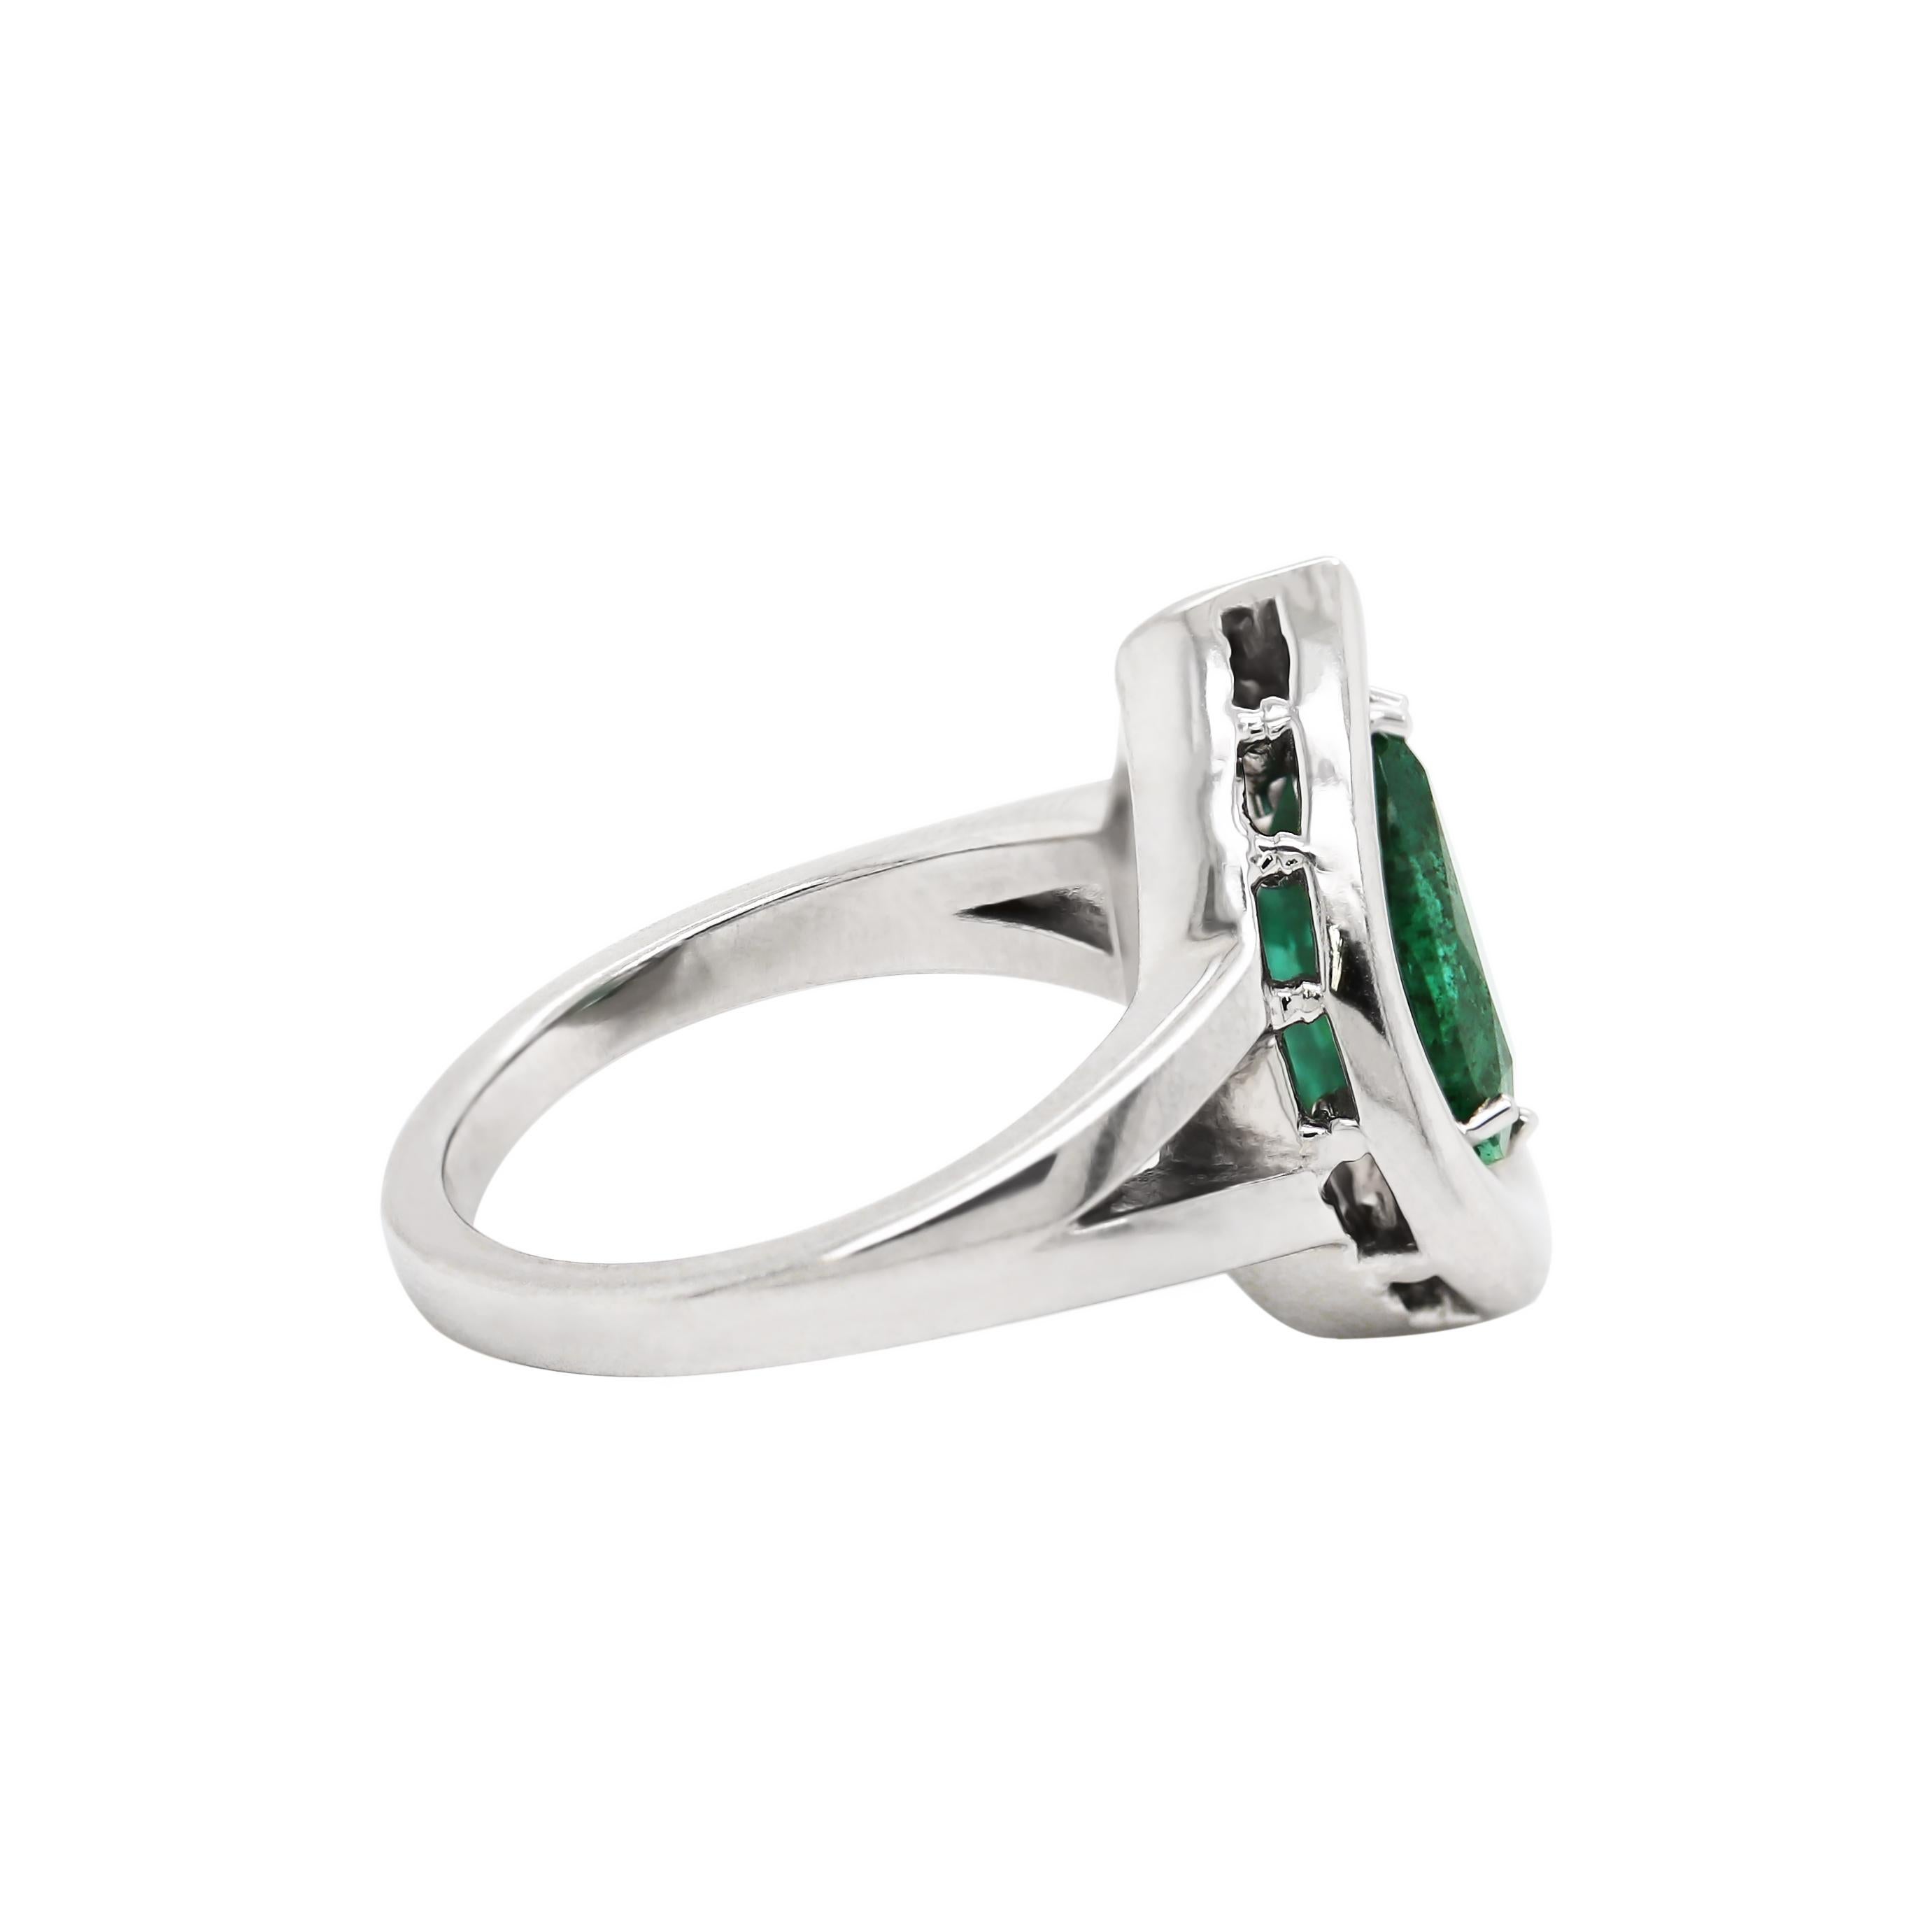 This hand made ring features a beautiful pear shaped emerald weighing 2.72ct, mounted in a six claw, open back setting. The stone is set in the centre of a platinum tear drop frame mounted on a solid split shoulder shank. Hallmarked, Platinum. UK